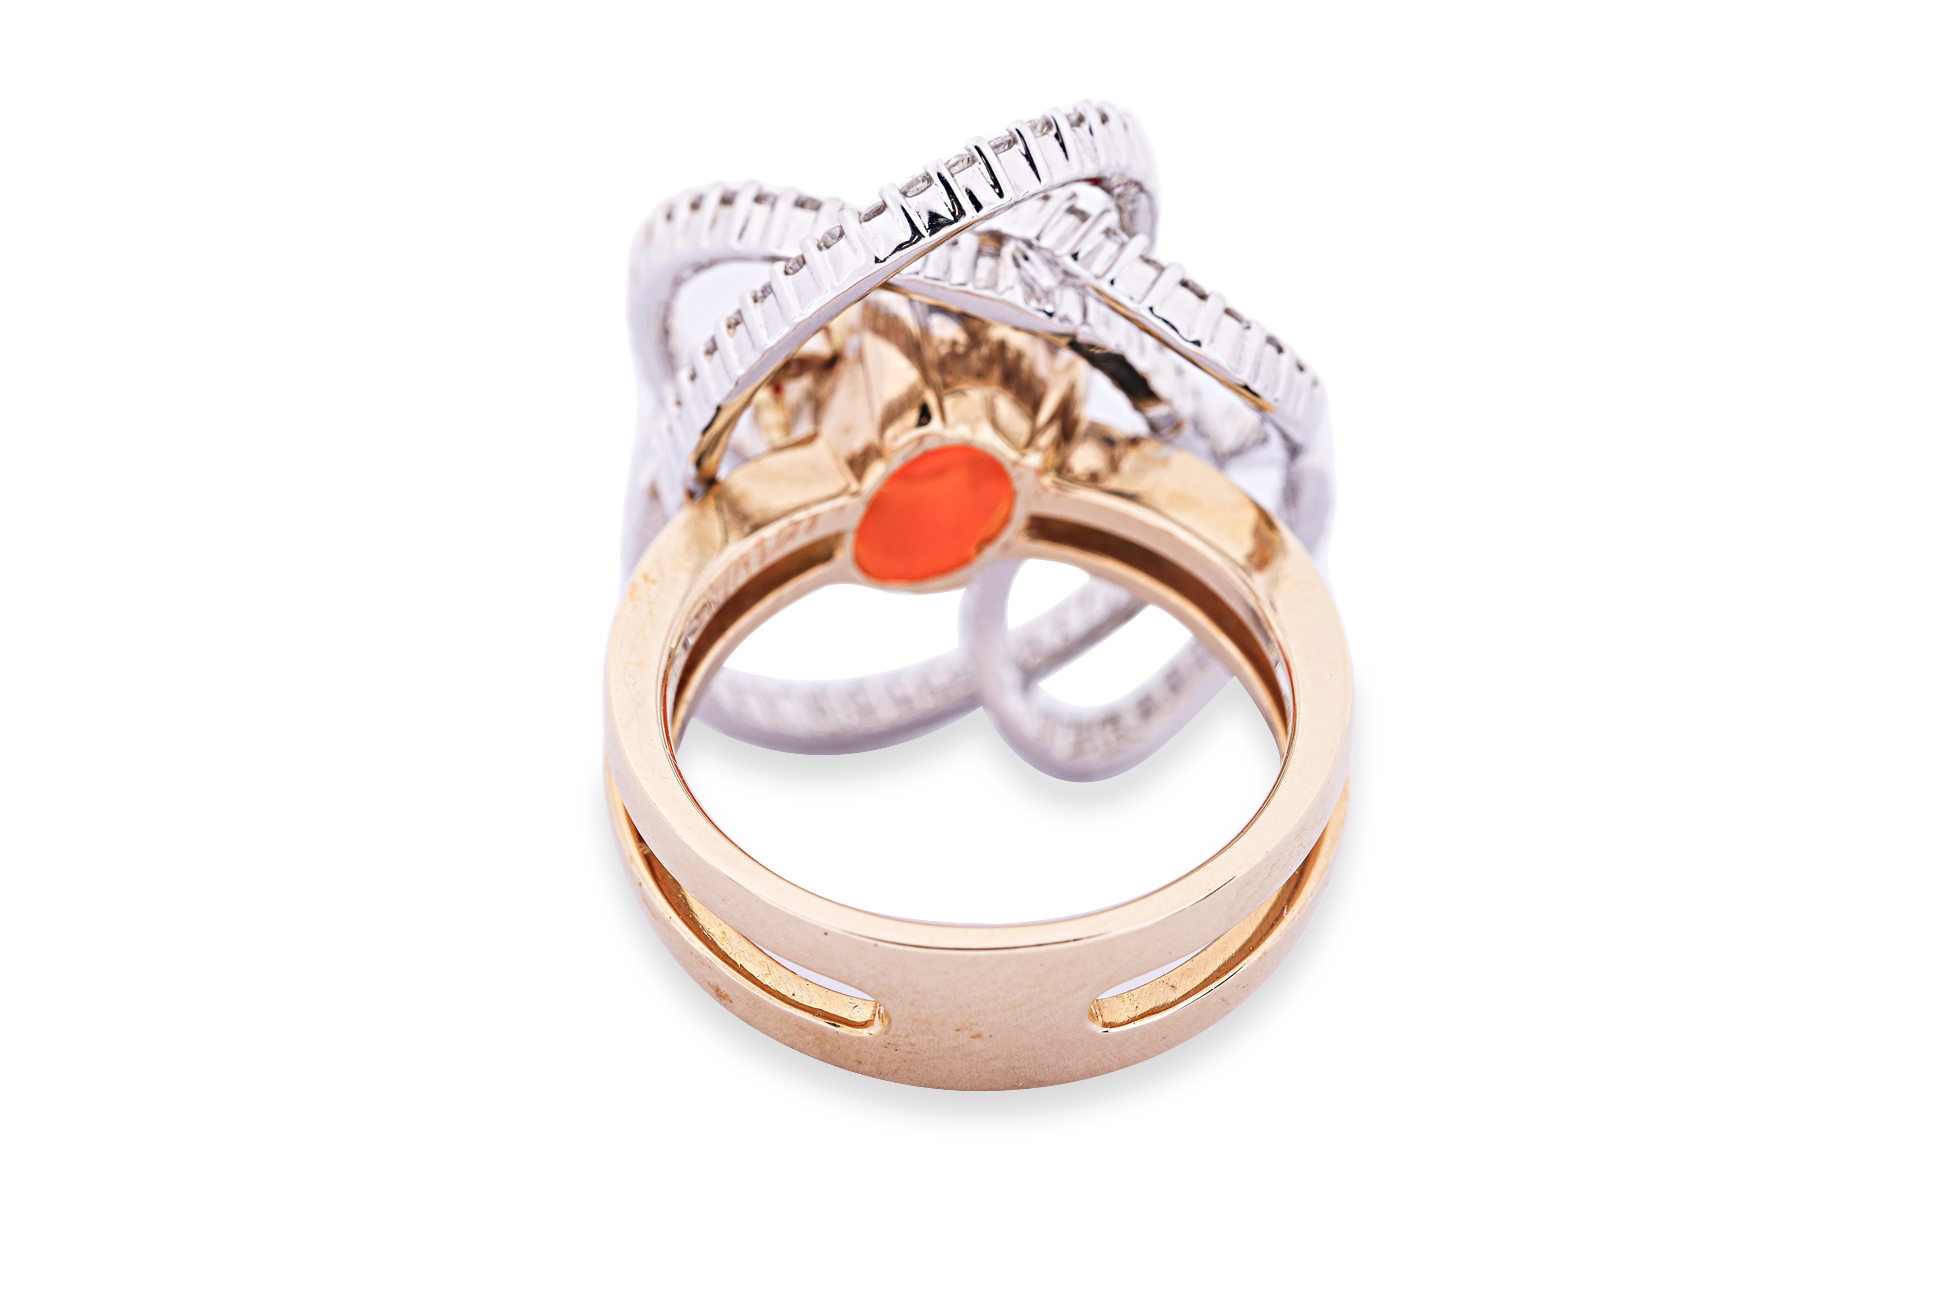 A FIRE OPAL AND DIAMOND RING - Image 3 of 4